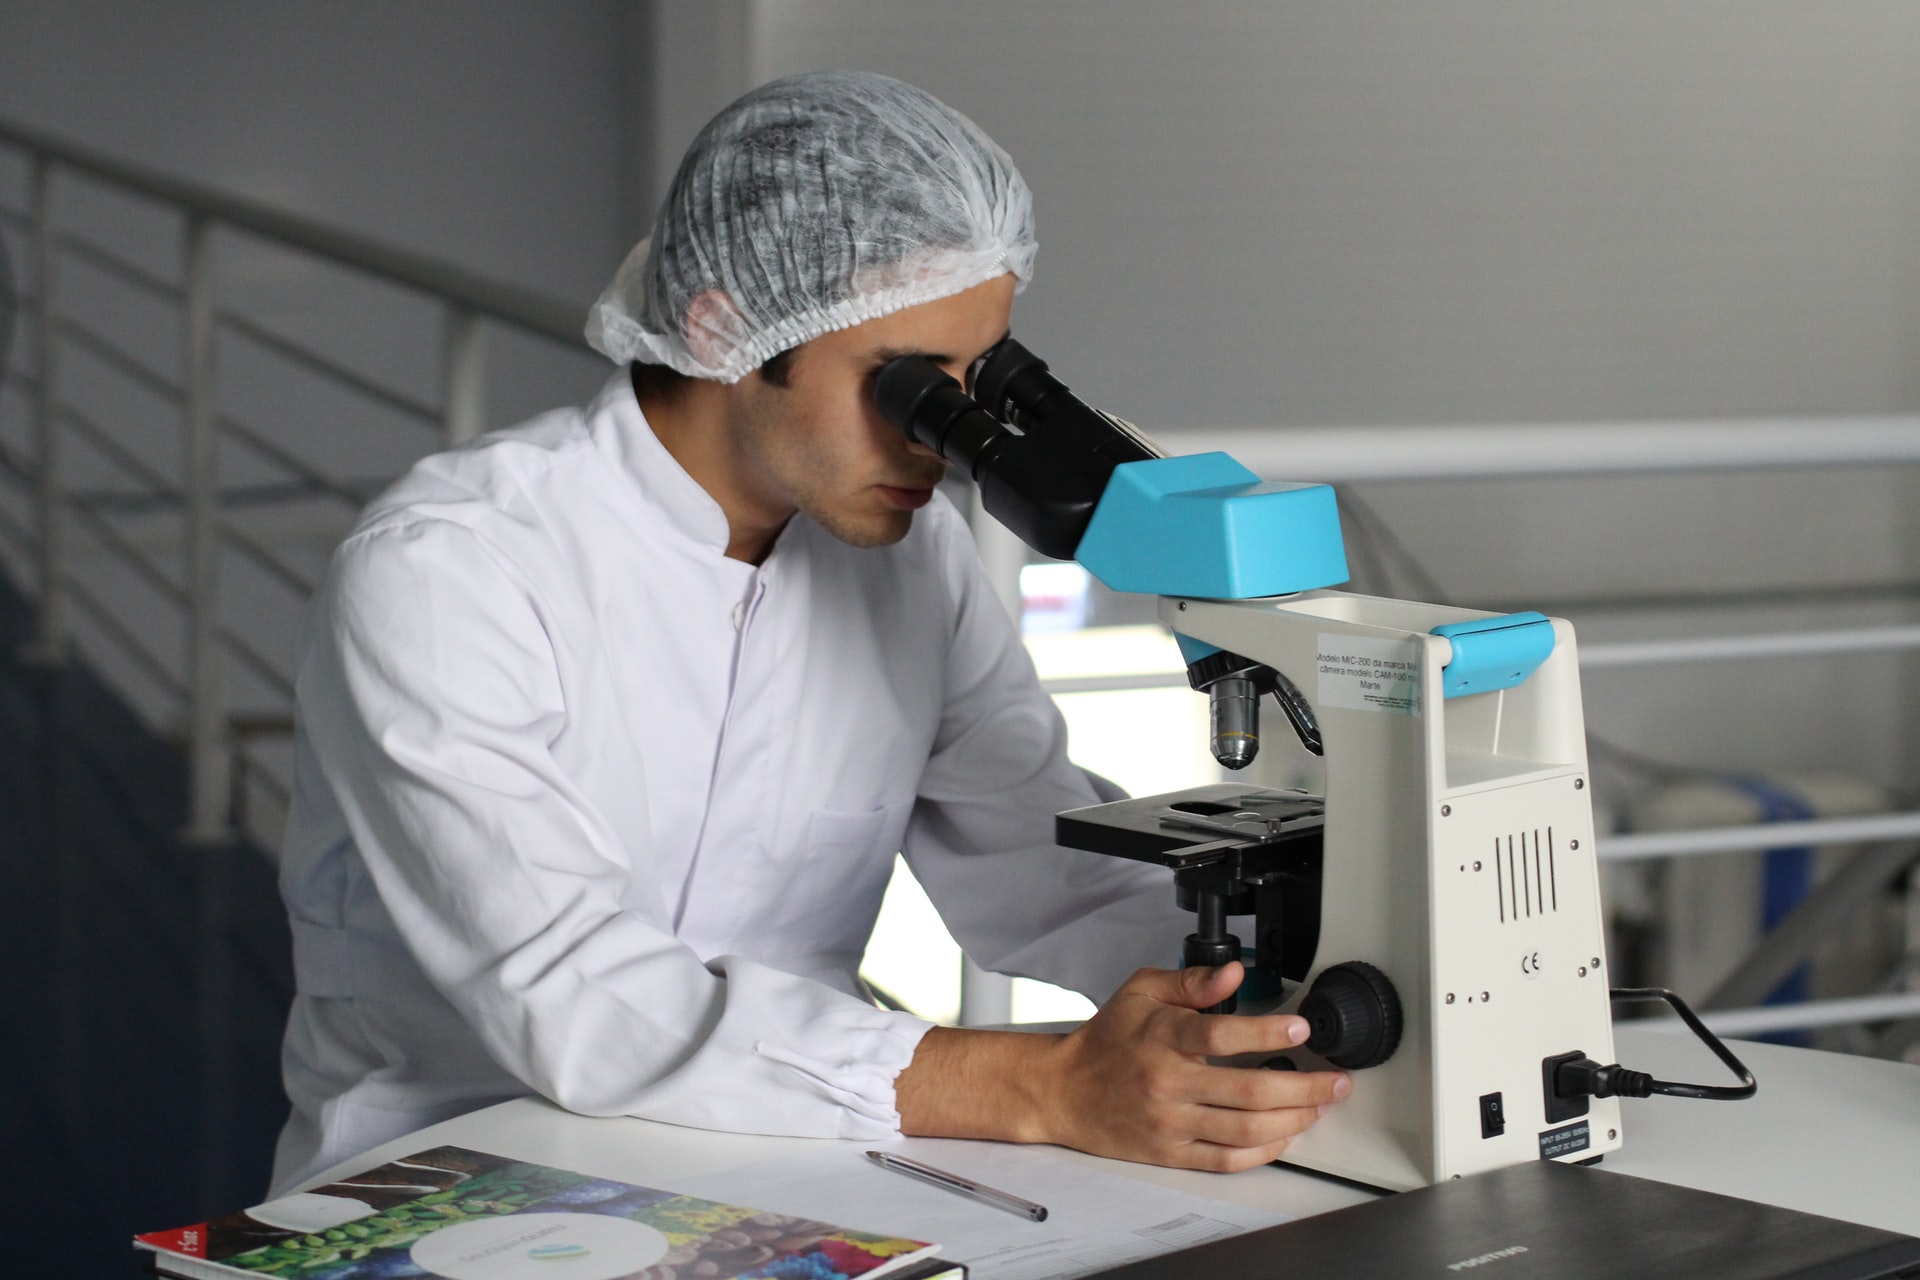 A researcher looks in an optical microscope